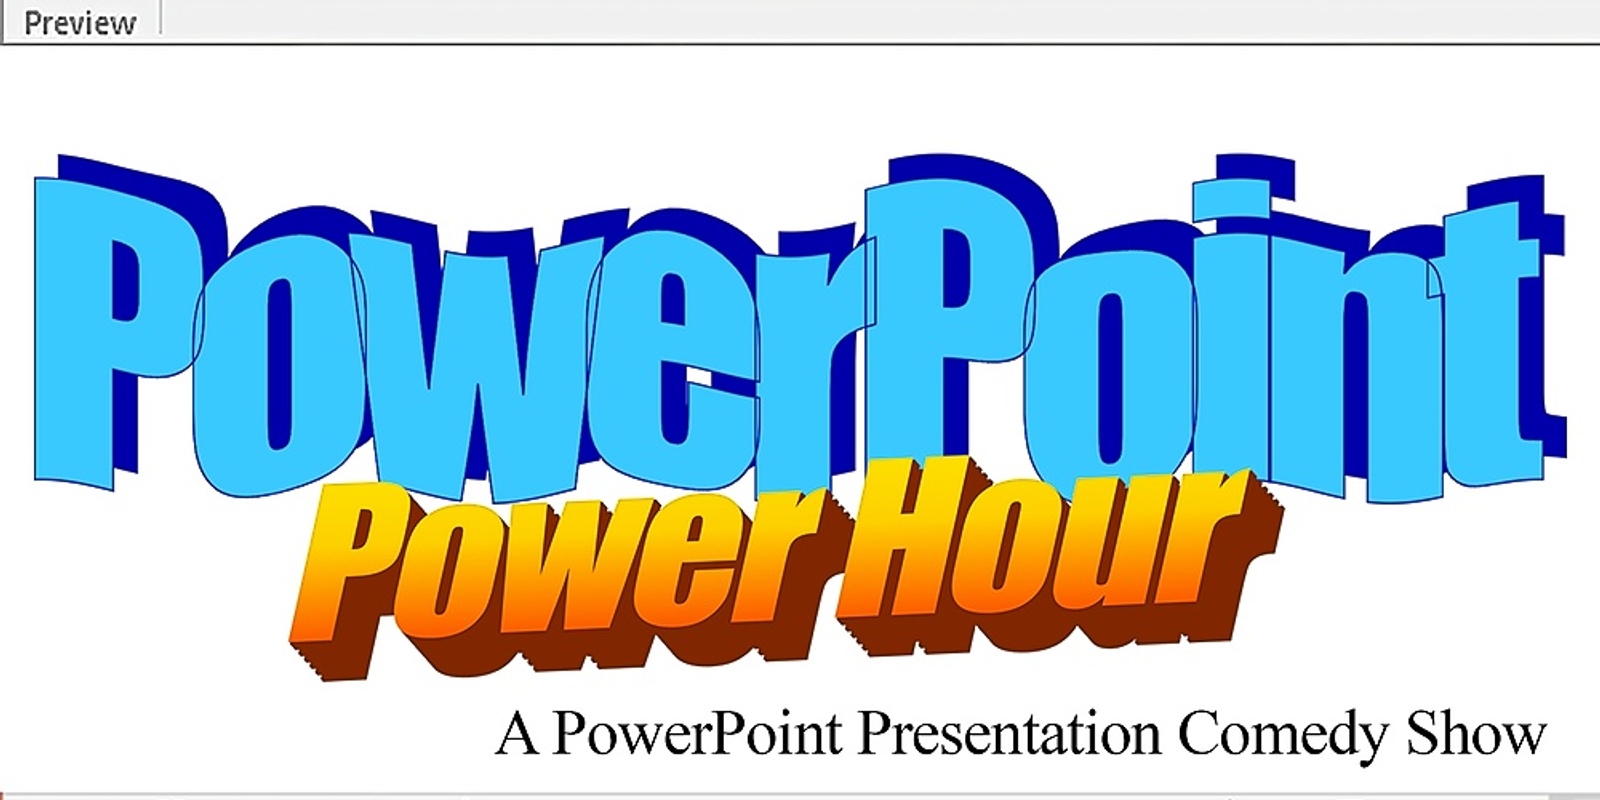 The PowerPoint Power Hour: A PowerPoint Presentation Comedy Show